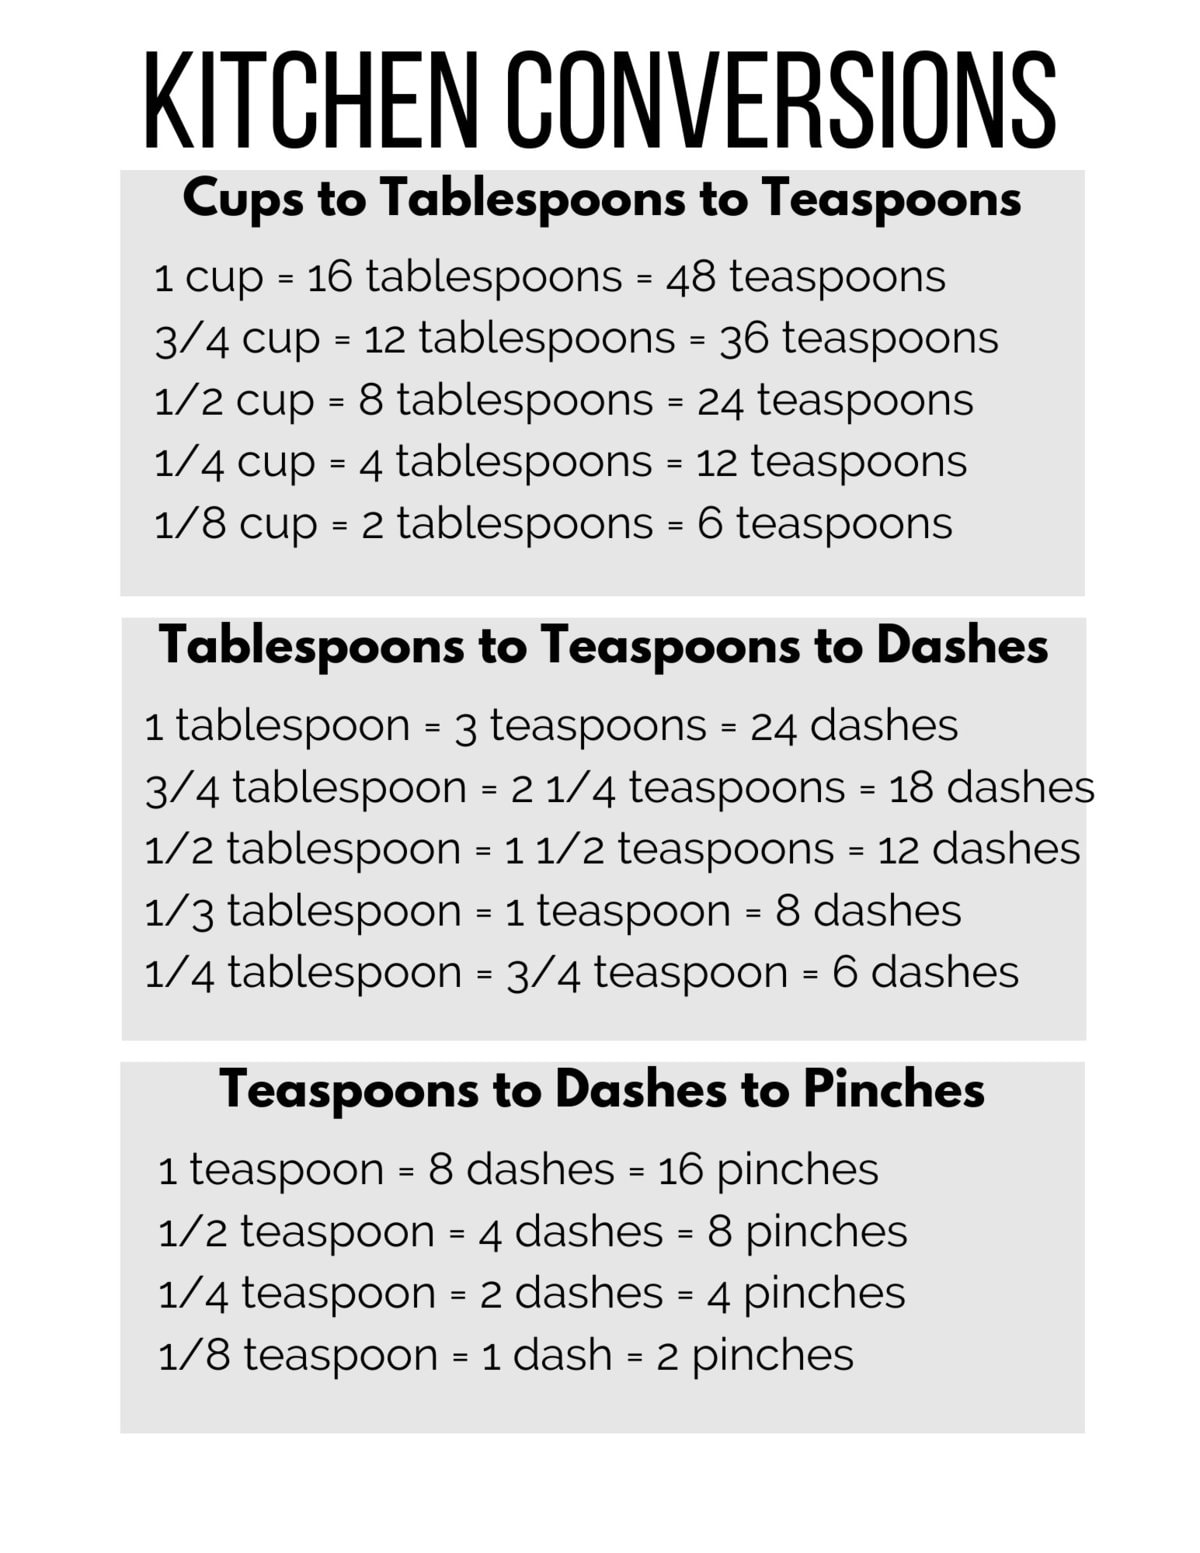 Tablespoons to Cups: Quick Conversion Guide - The Kitchen Community